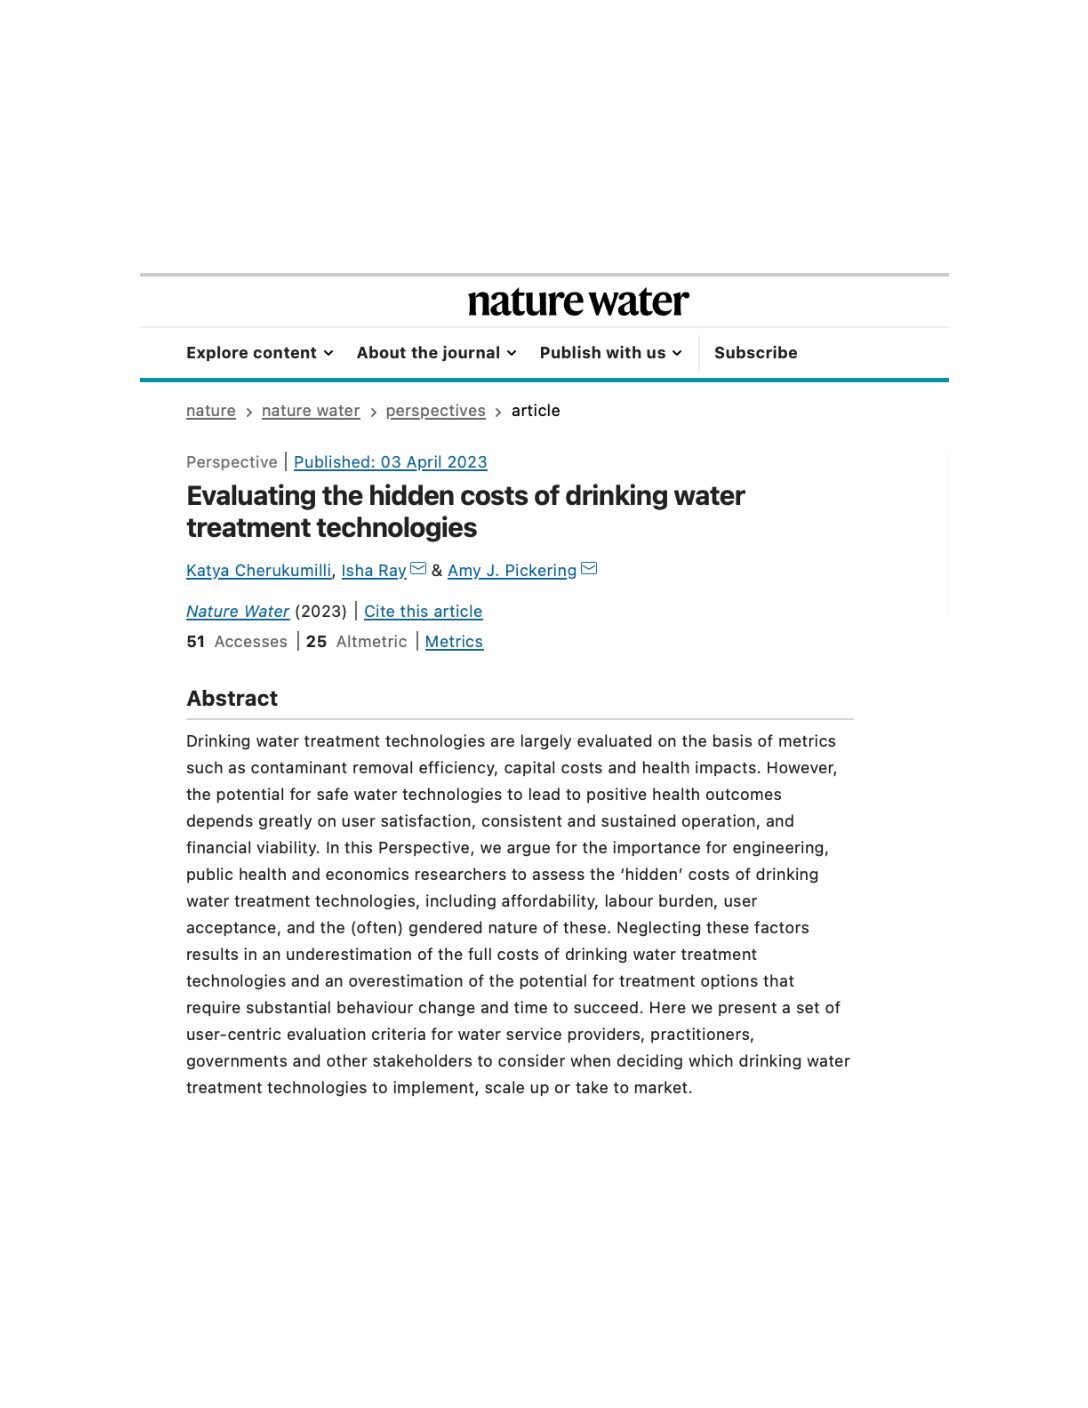 Evaluating the hidden costs of drinking water treatment technologies